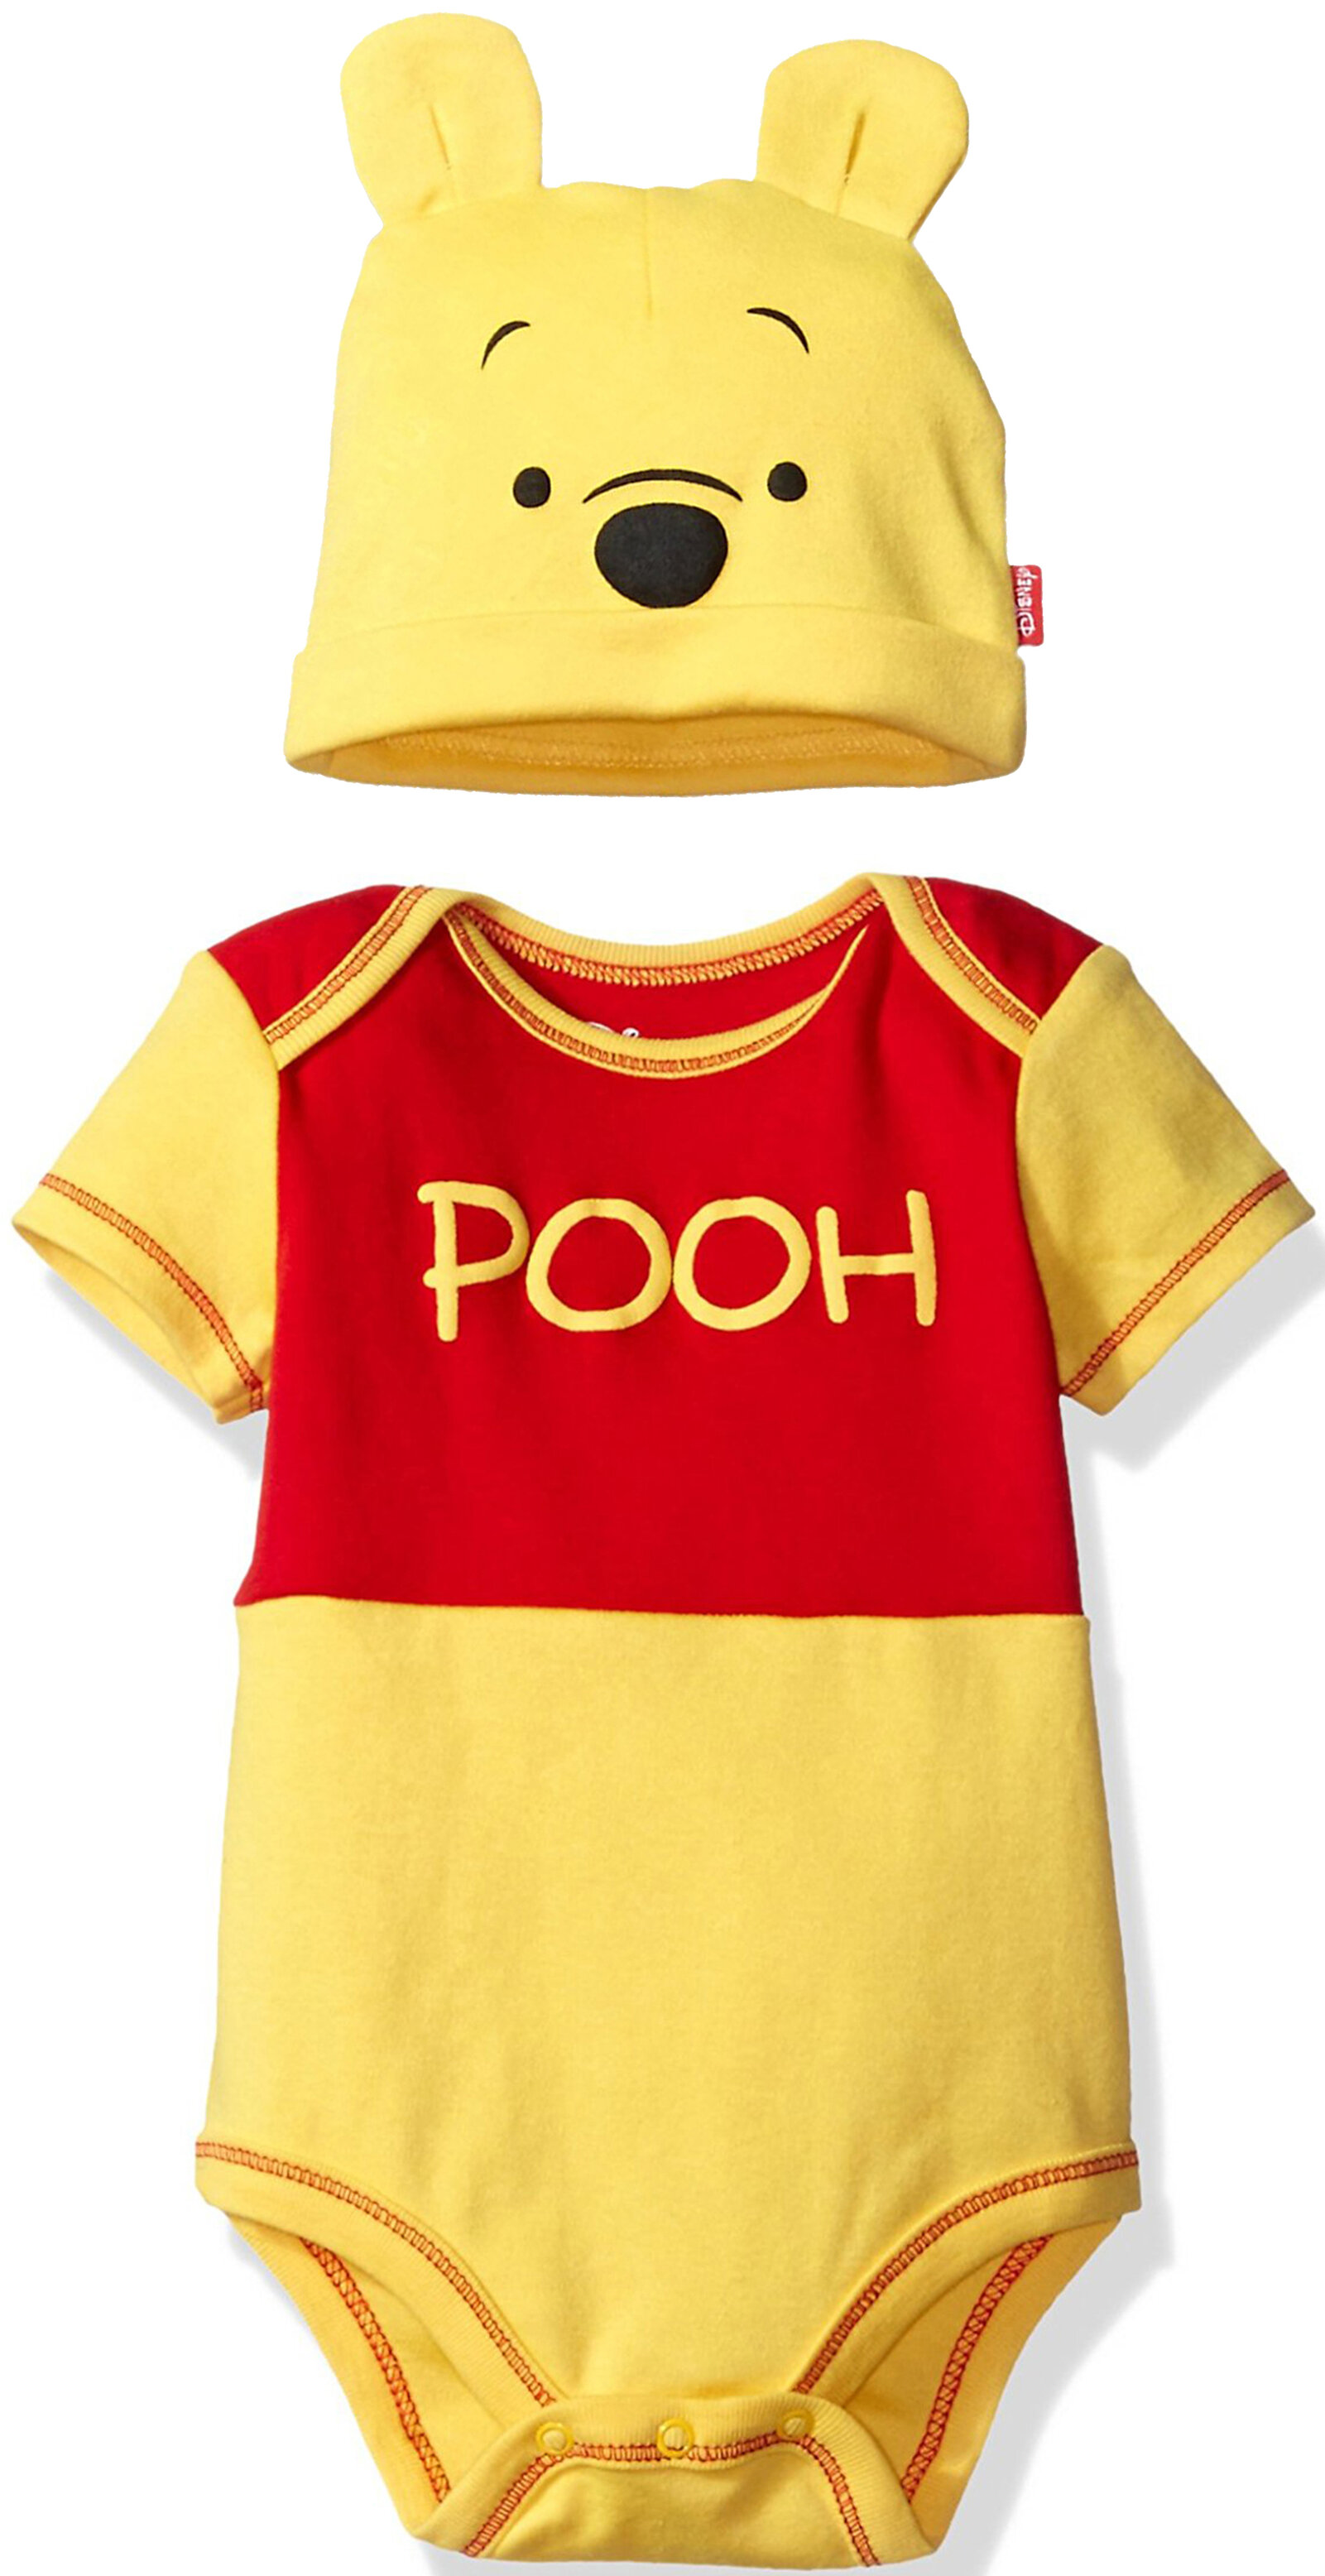 Disney Winnie the Pooh Infant Baby Boys Bodysuit and Hat Set Newborn to Infant - image 1 of 5